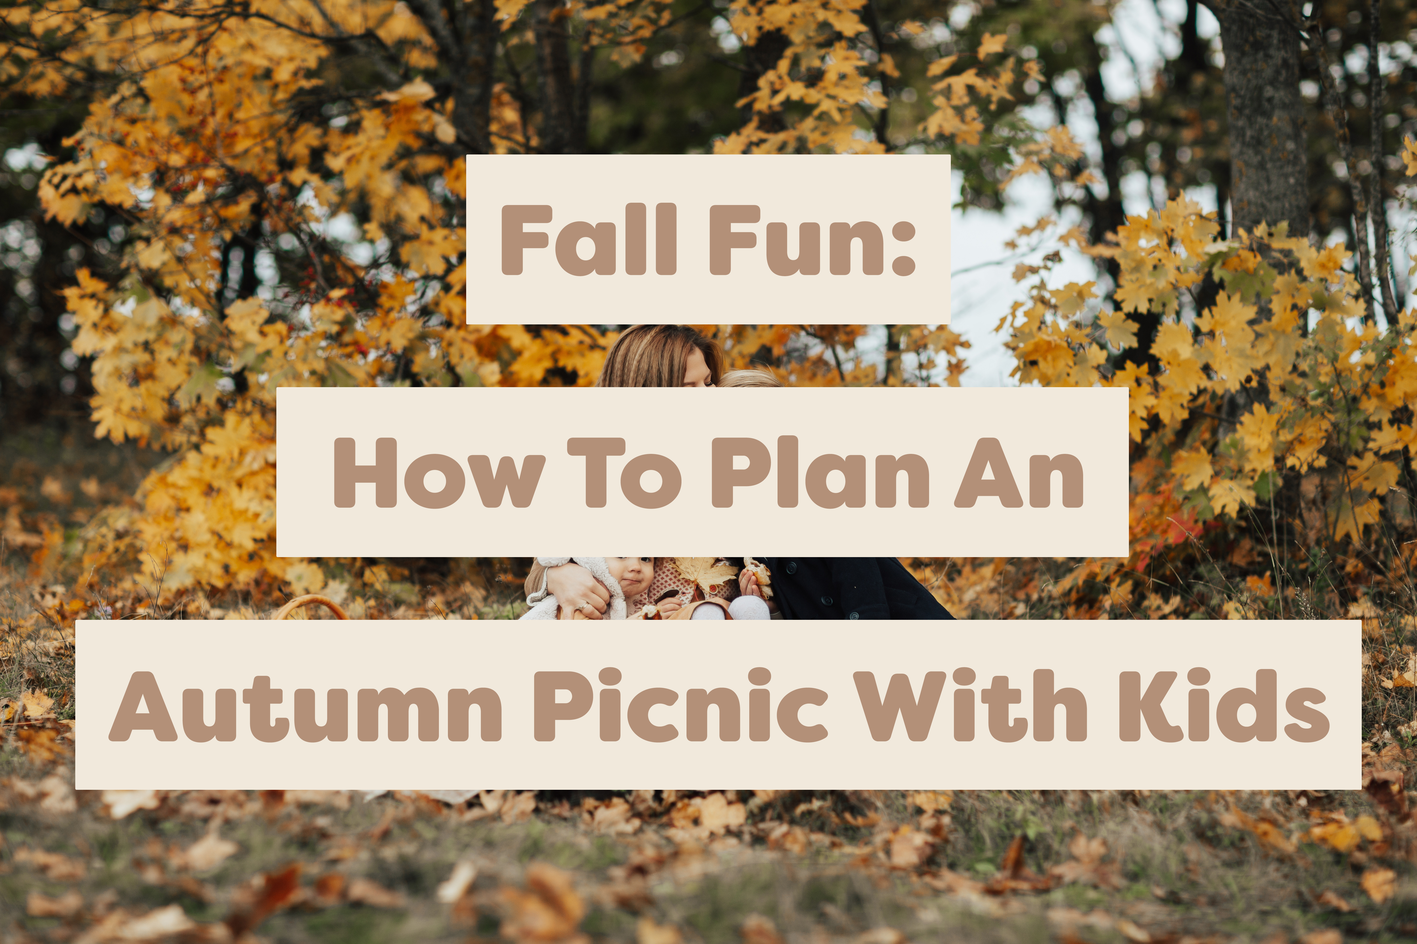 Fall Fun: How to Plan an Autumn Picnic with Kids